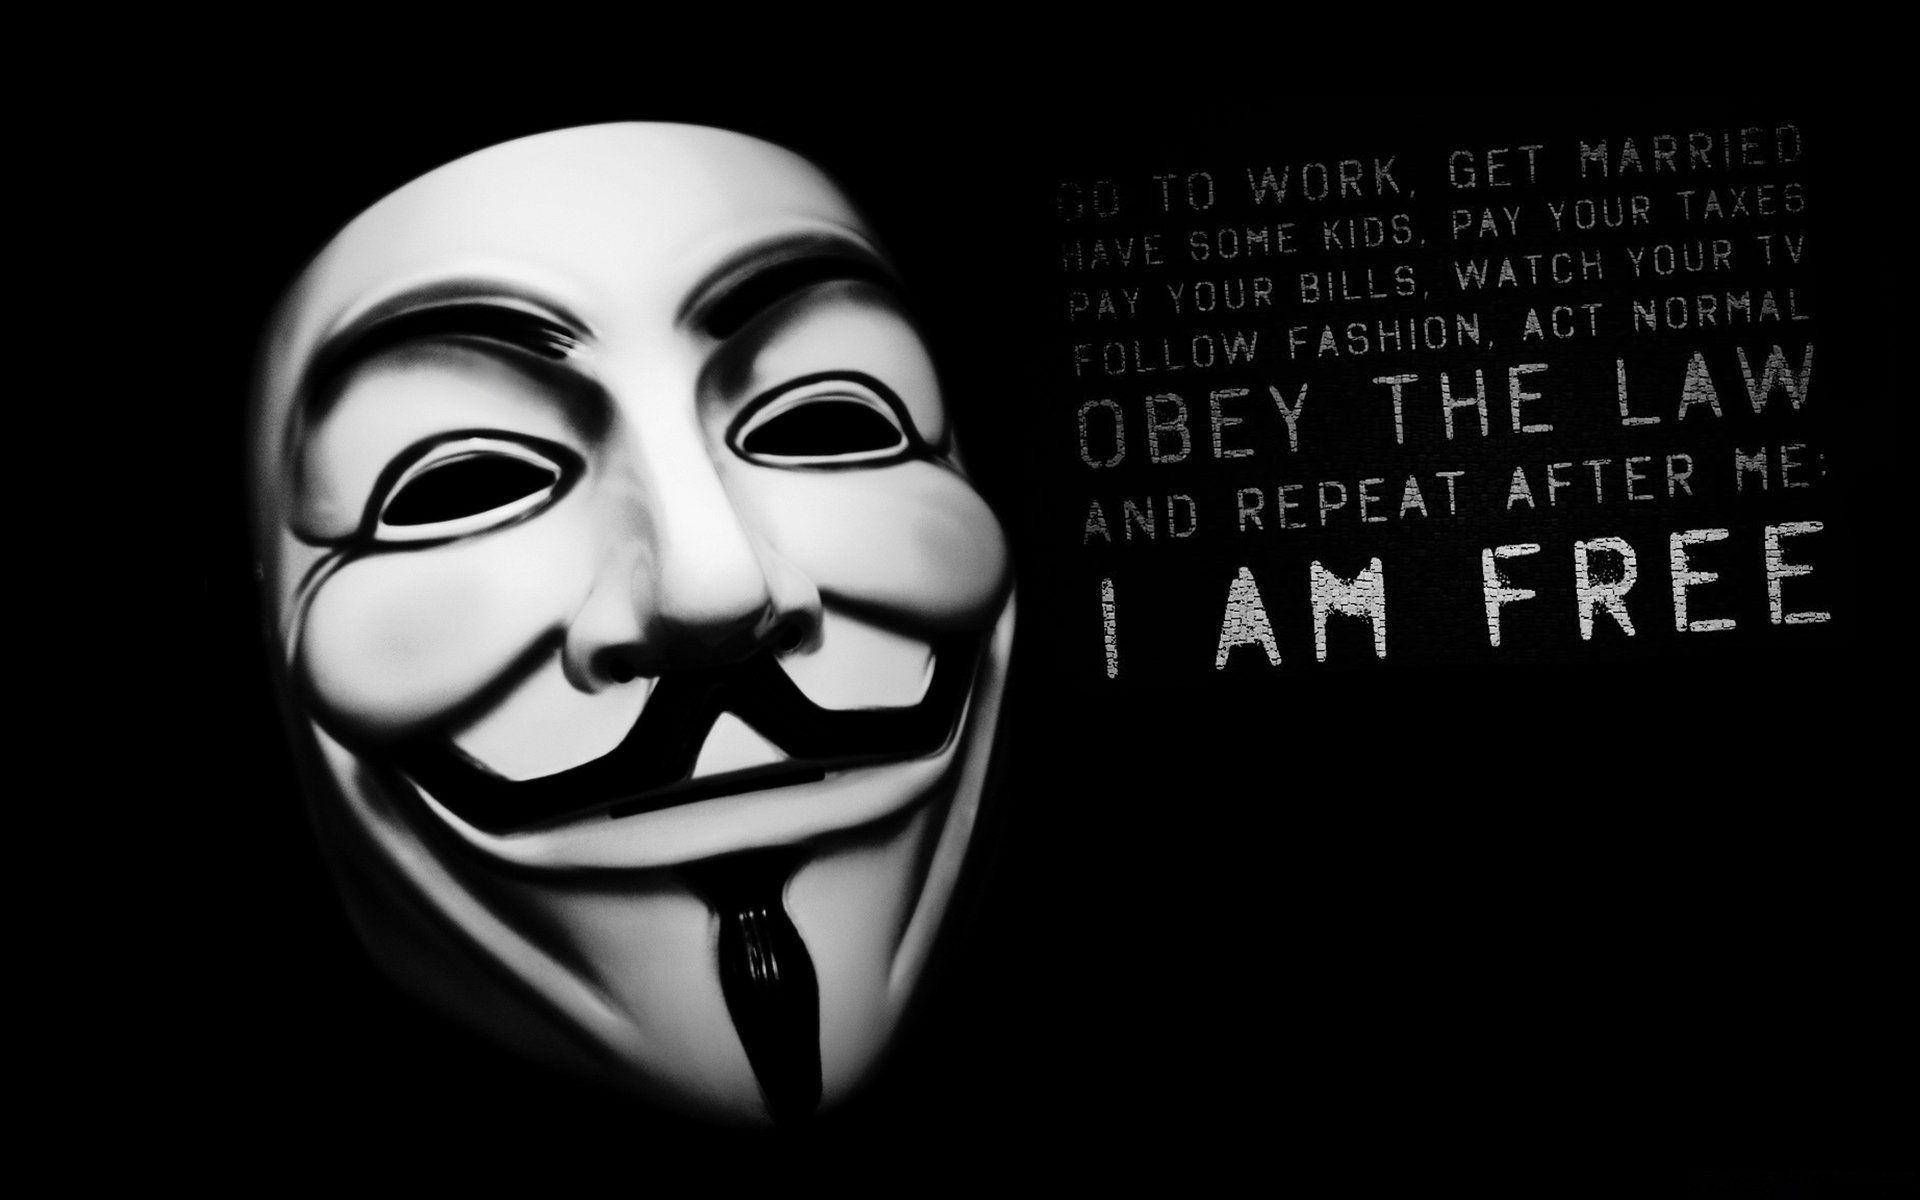 Anonymous Wallpaper Quotes. New Wallpaper HD